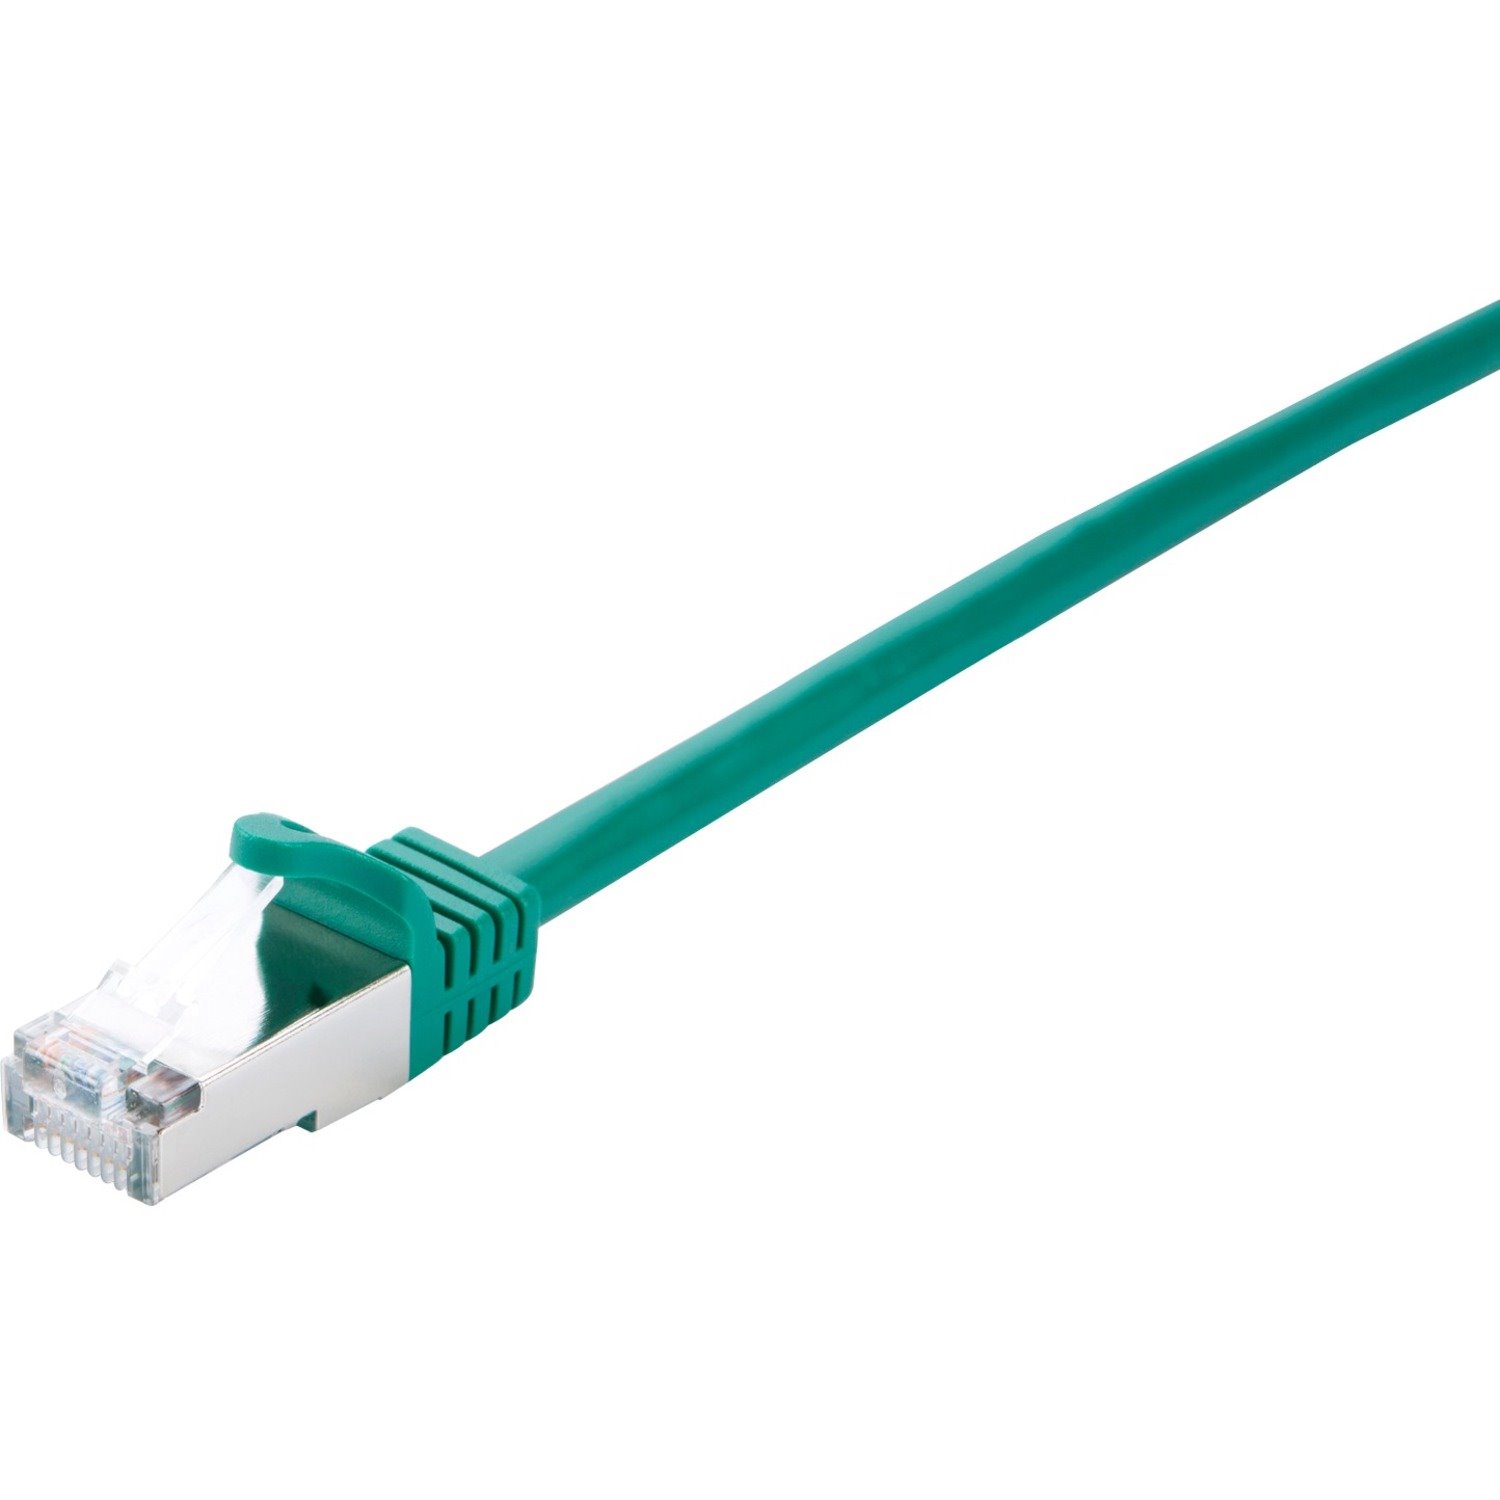 V7 Green Cat6 Shielded (STP) Cable RJ45 Male to RJ45 Male 2m 6.6ft